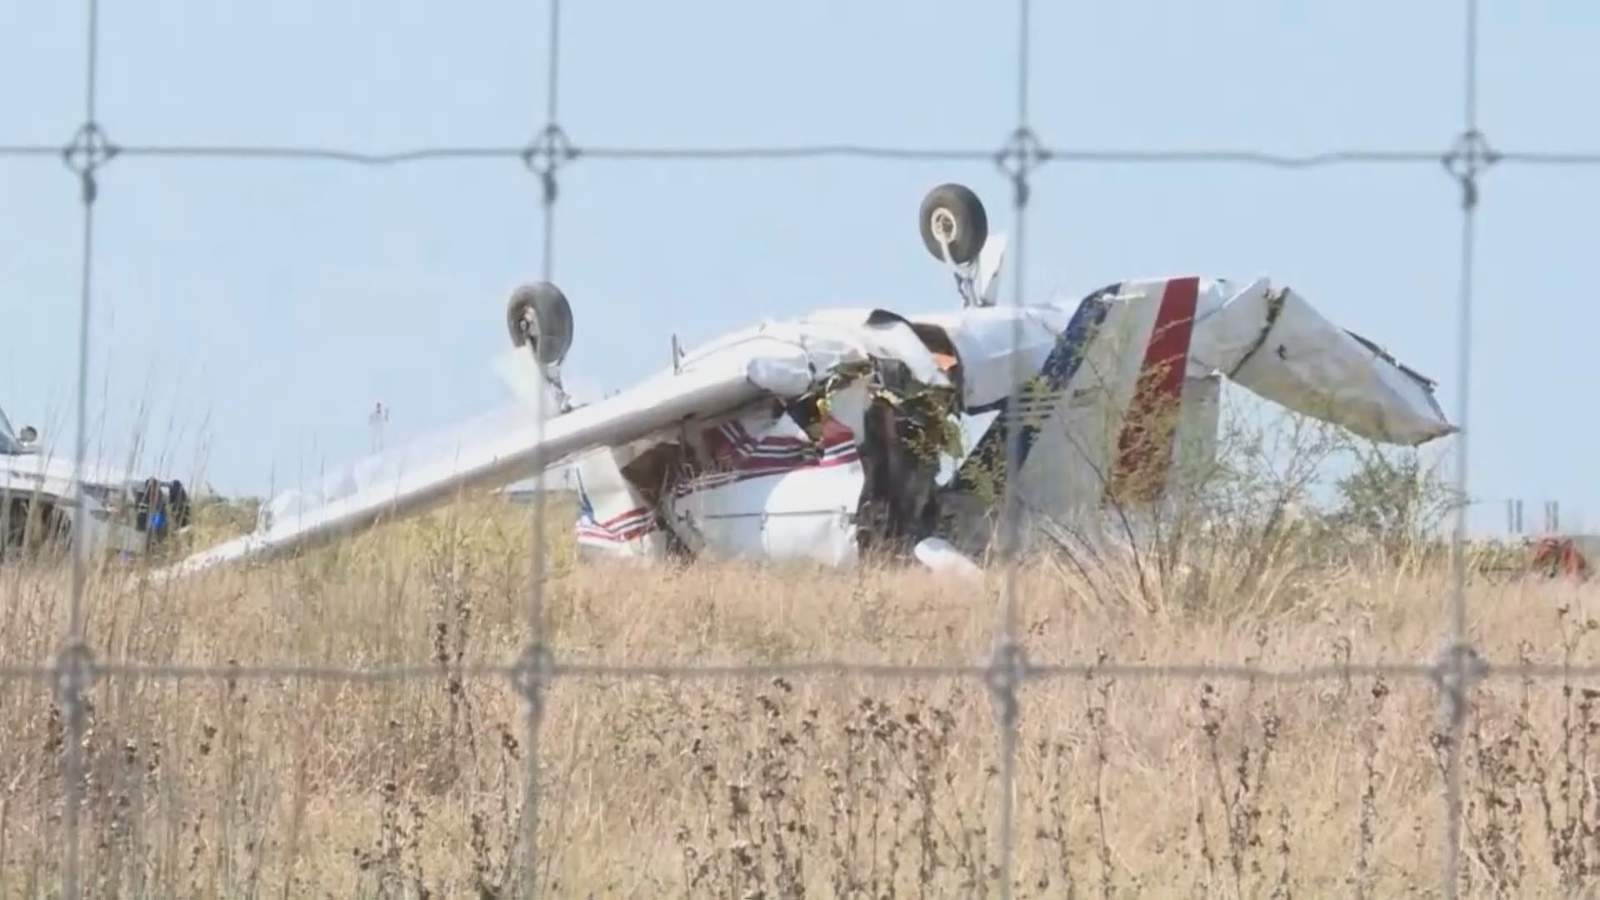 3 dead, 1 hospitalized after plane crash in Bryan, police say